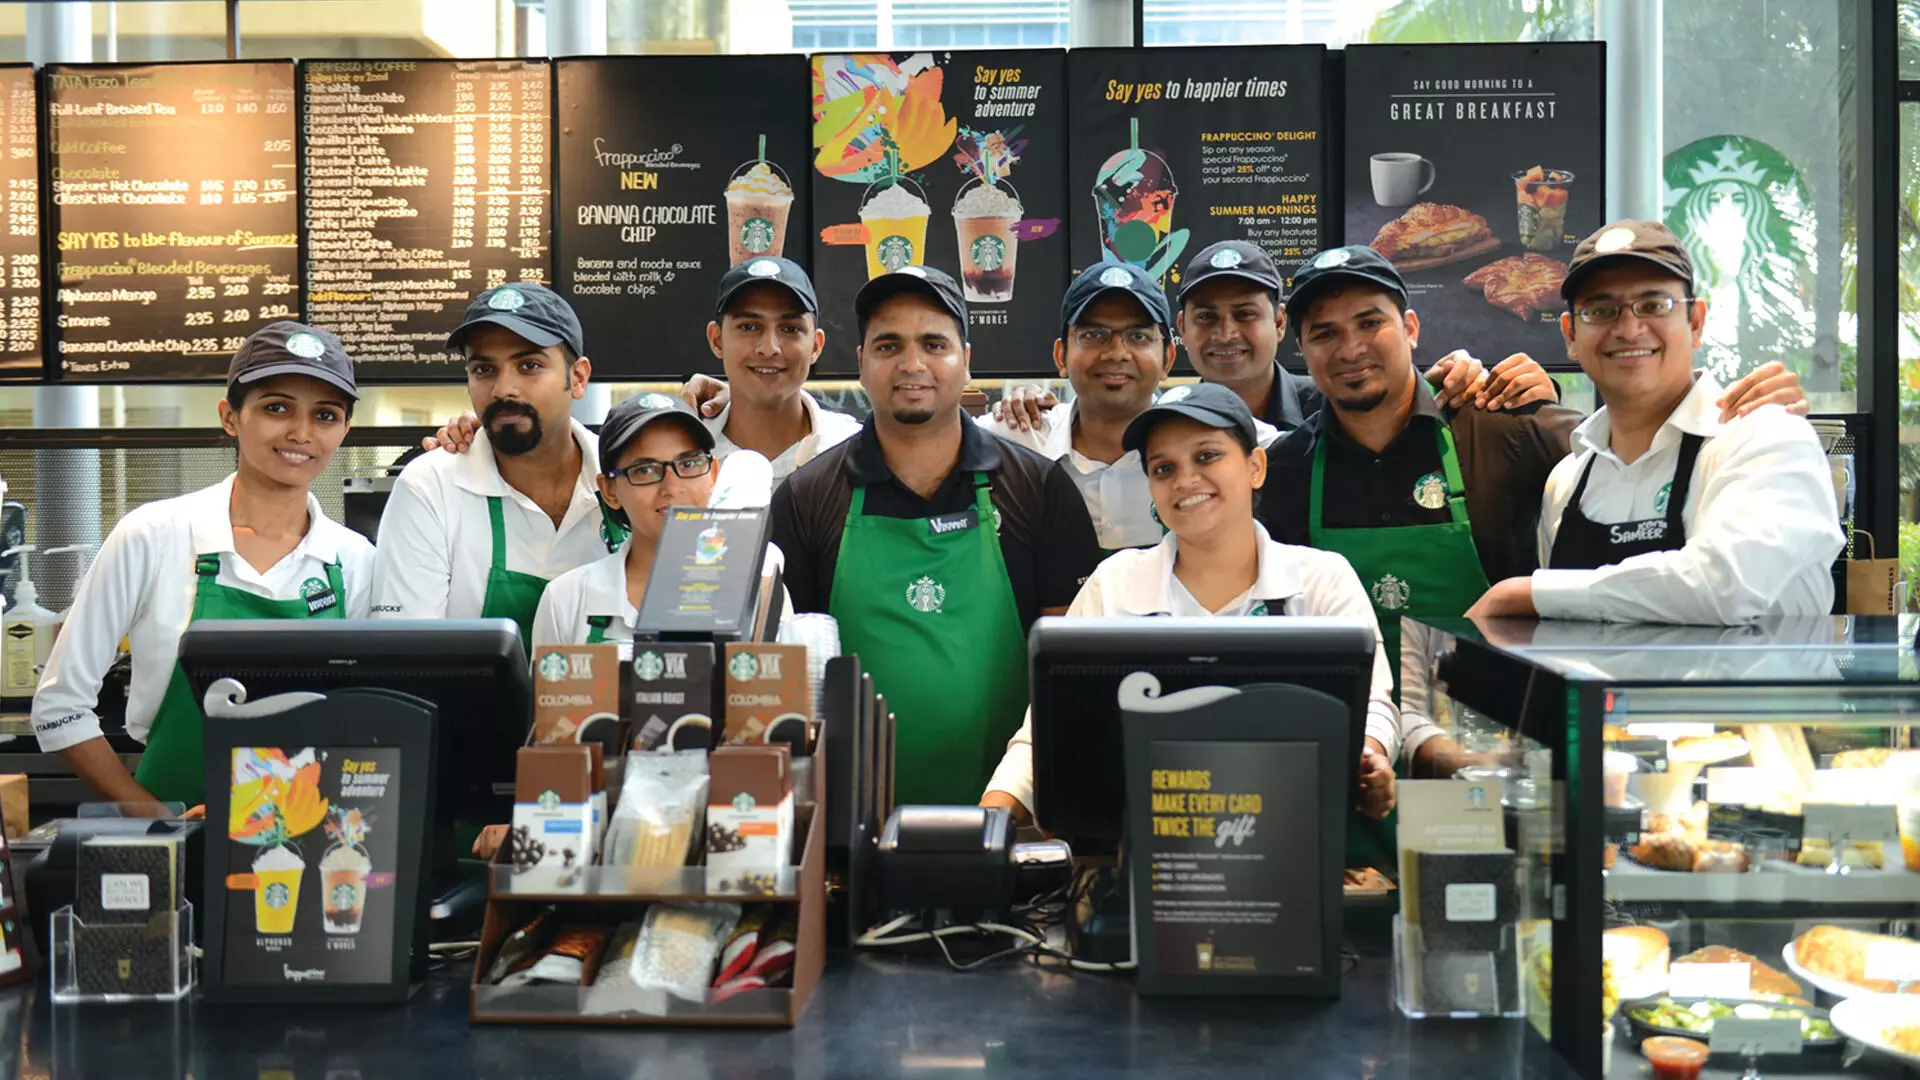 Tata Starbucks aims to expand its presence to 1,000 stores in India by 2028, enter tier-2/3 cities